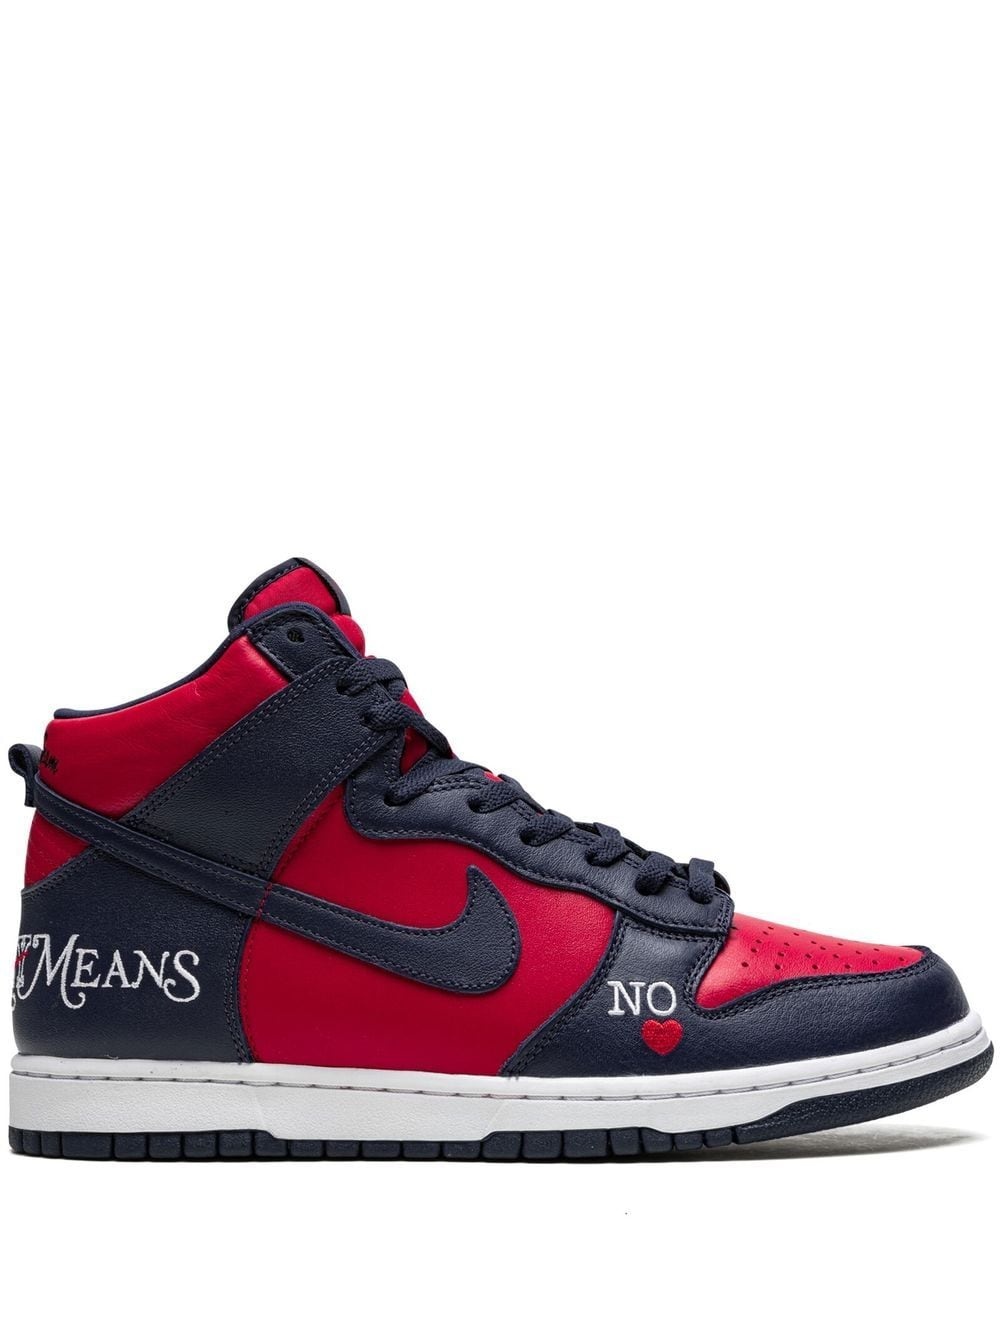 x Supreme SB Dunk High "By Any Means Navy/Red" sneakers - 1